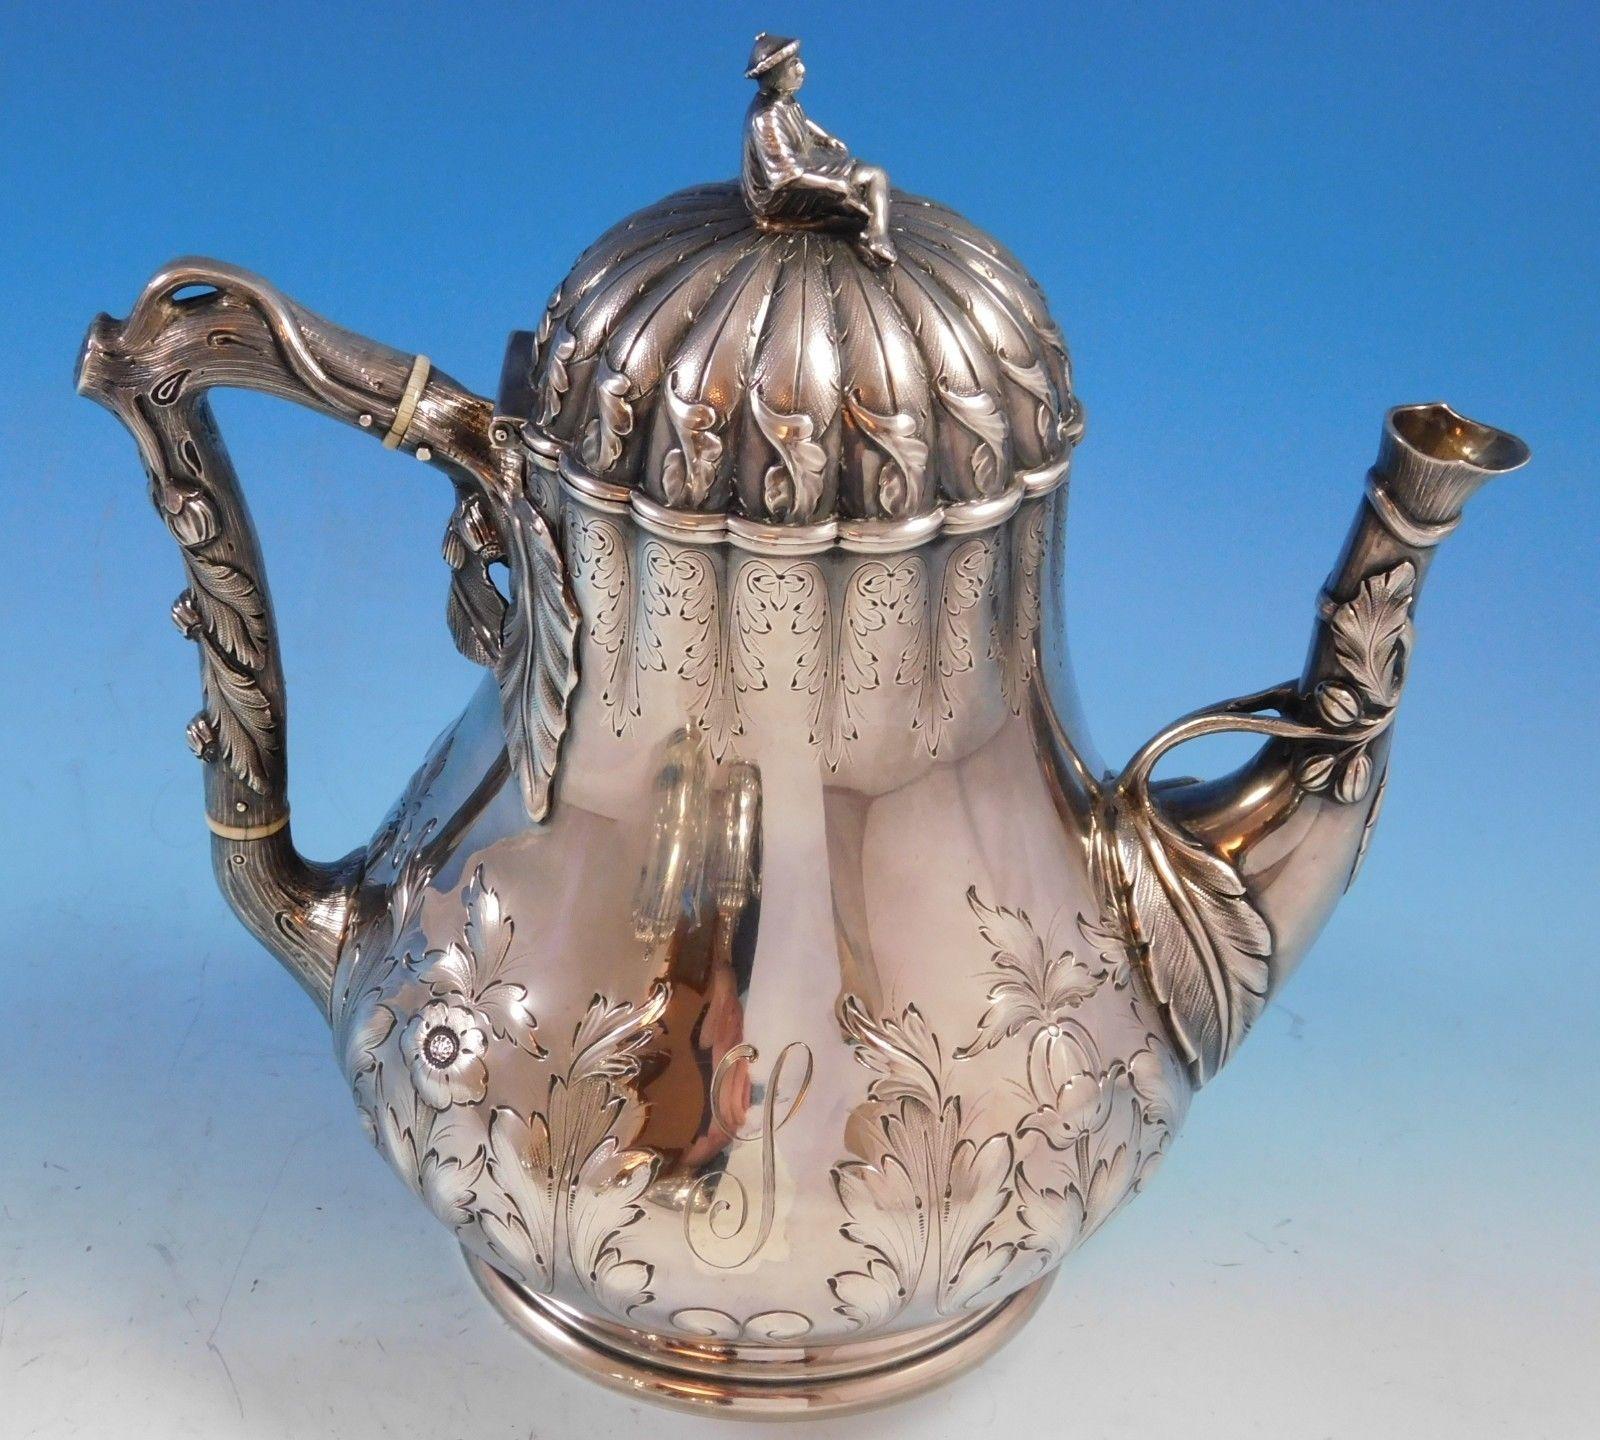 George Sharp

Four-piece sterling silver tea set made by George Sharp featuring 3-D cast finials of different Japanese figures, hand chased design, and faux bark/tree branch handles. The coffee pot has a figural spout. This set includes:

One coffee